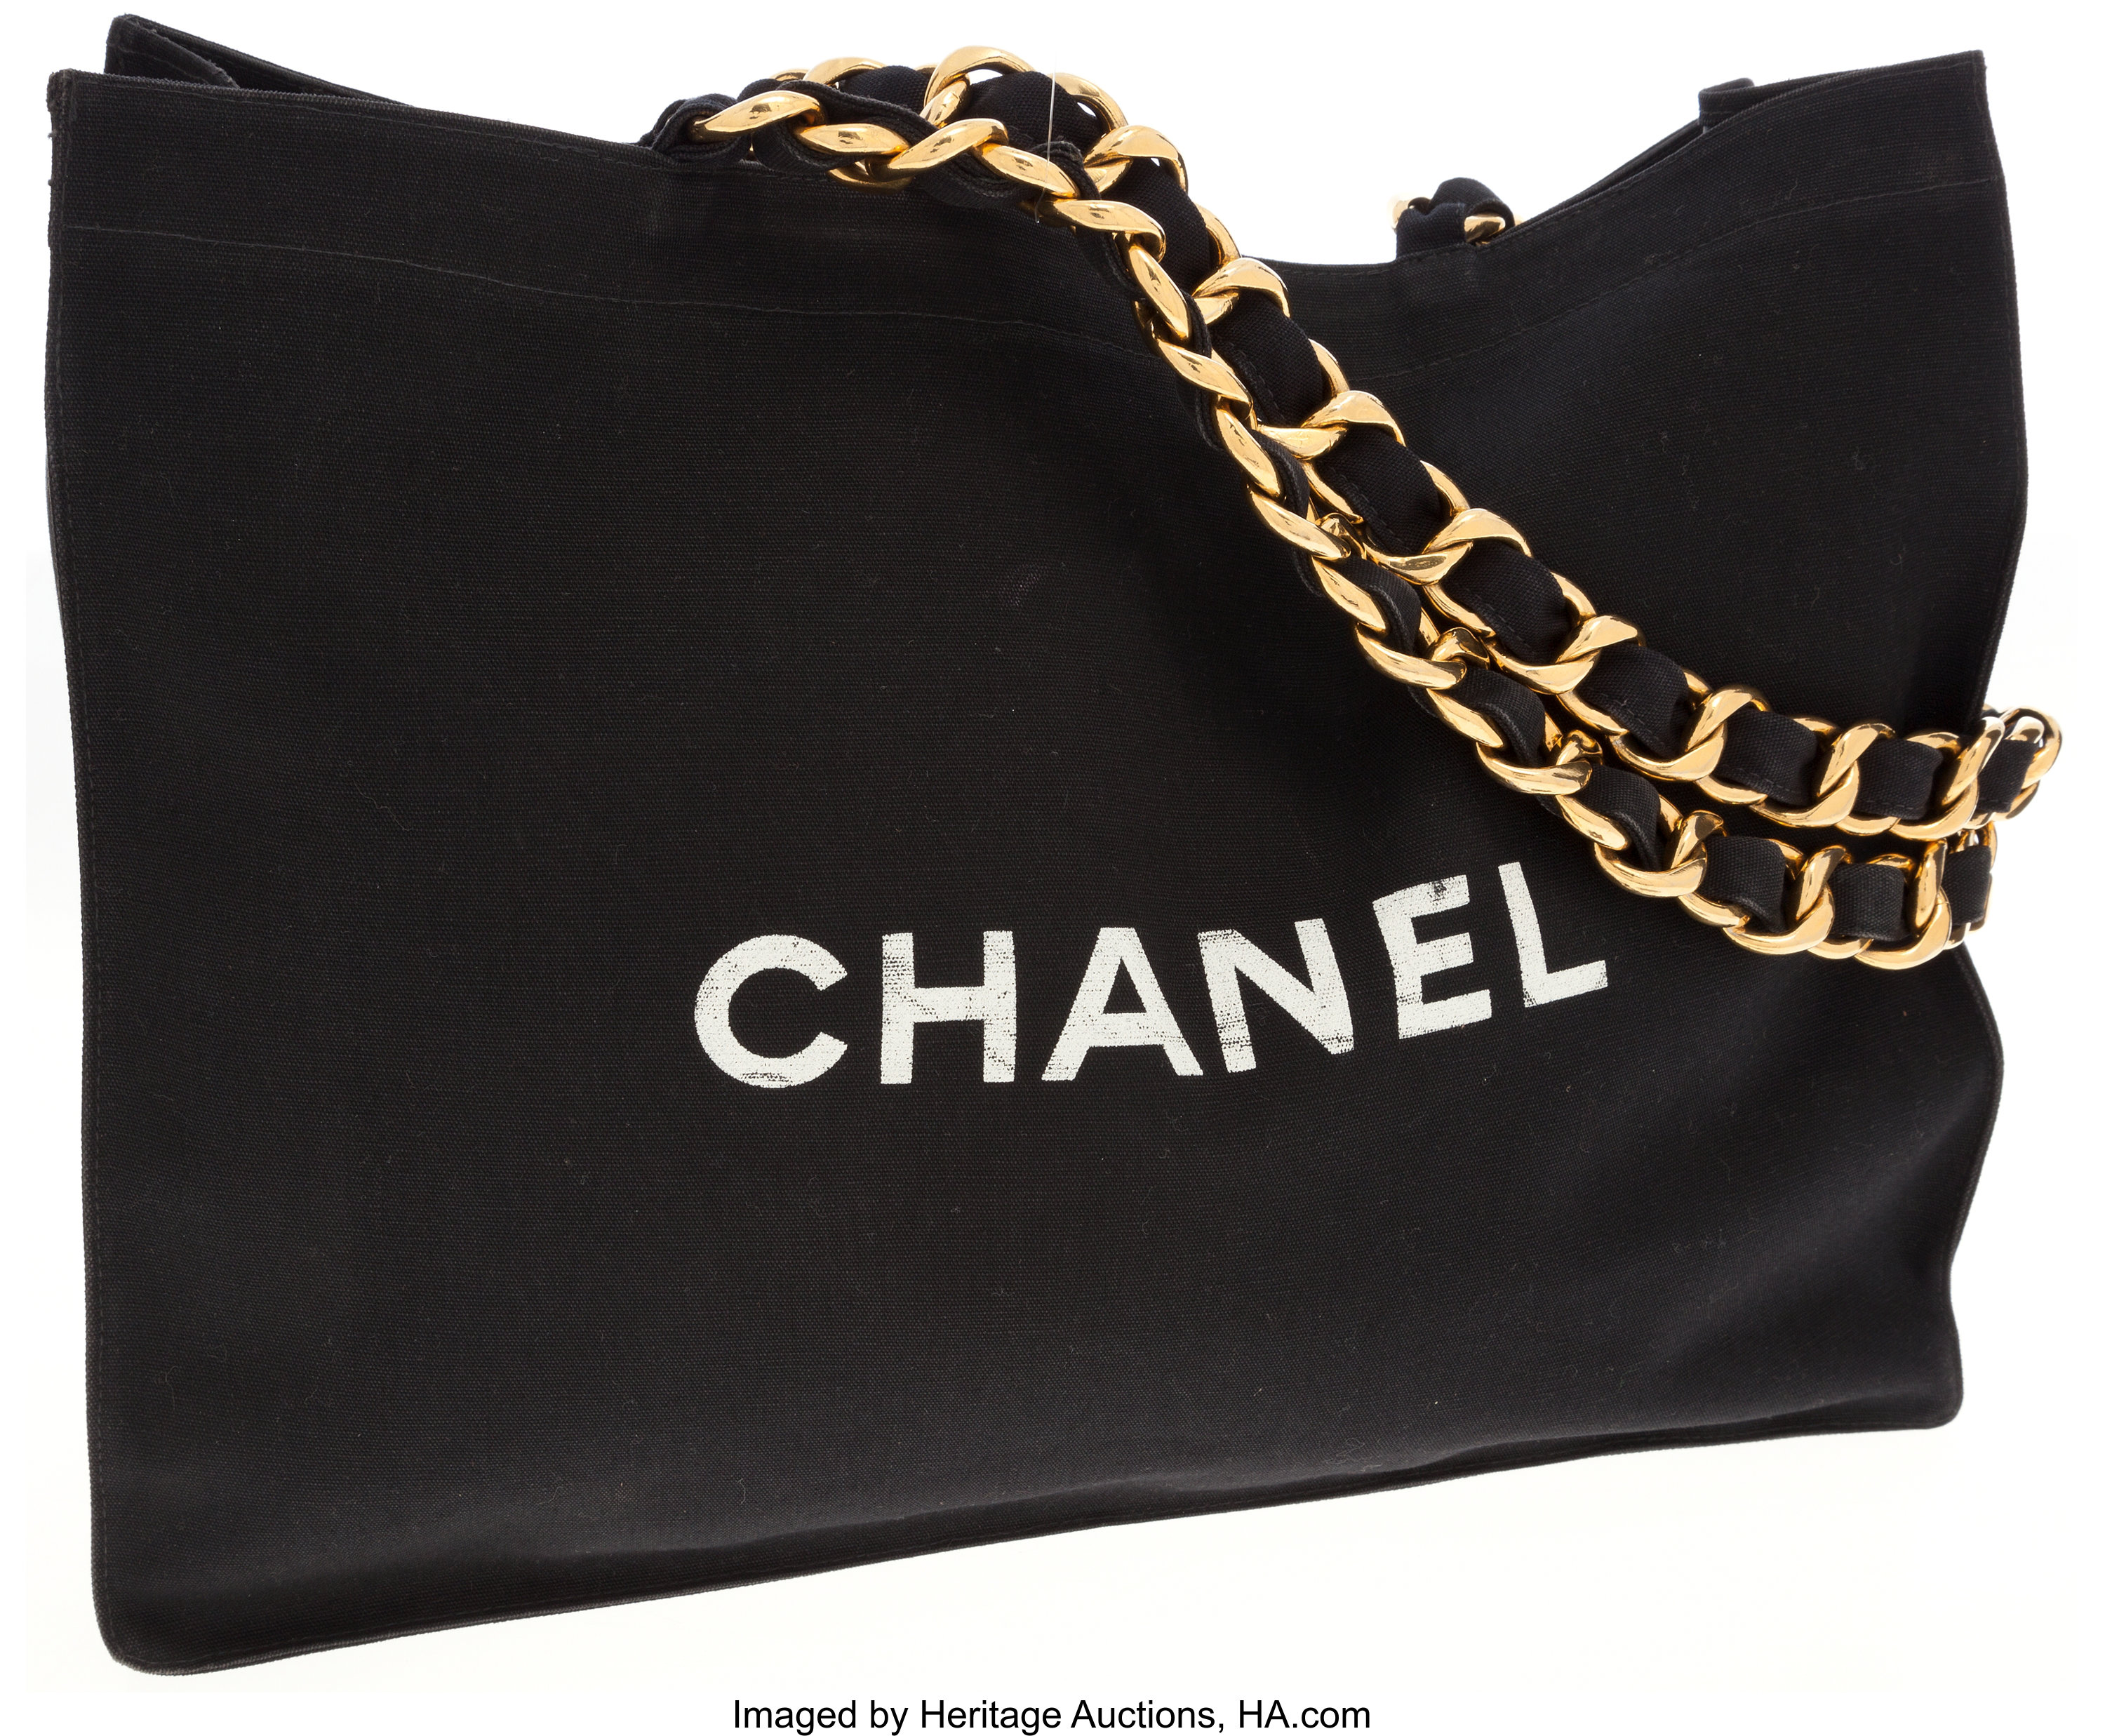 Chanel Black Canvas Oversized Tote Bag with Gold Chain Shoulder